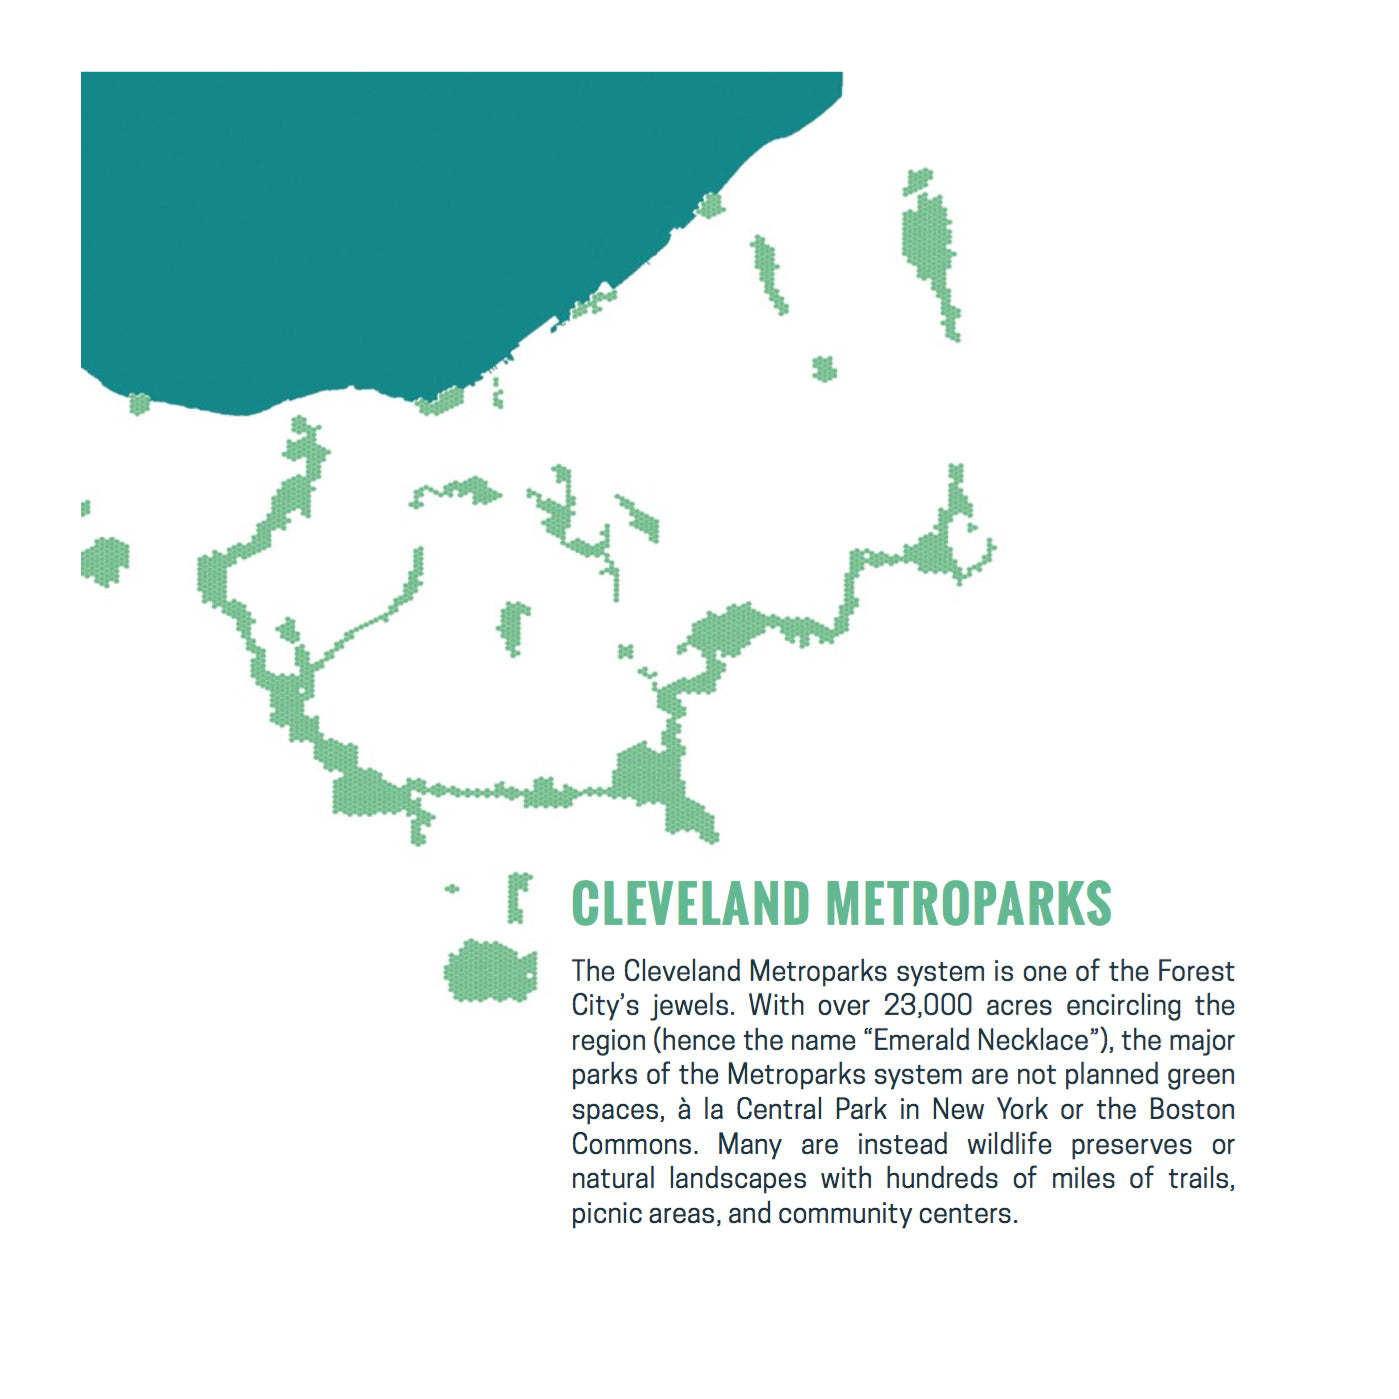 The Emerald Necklace by Julia Kuo on Dribbble